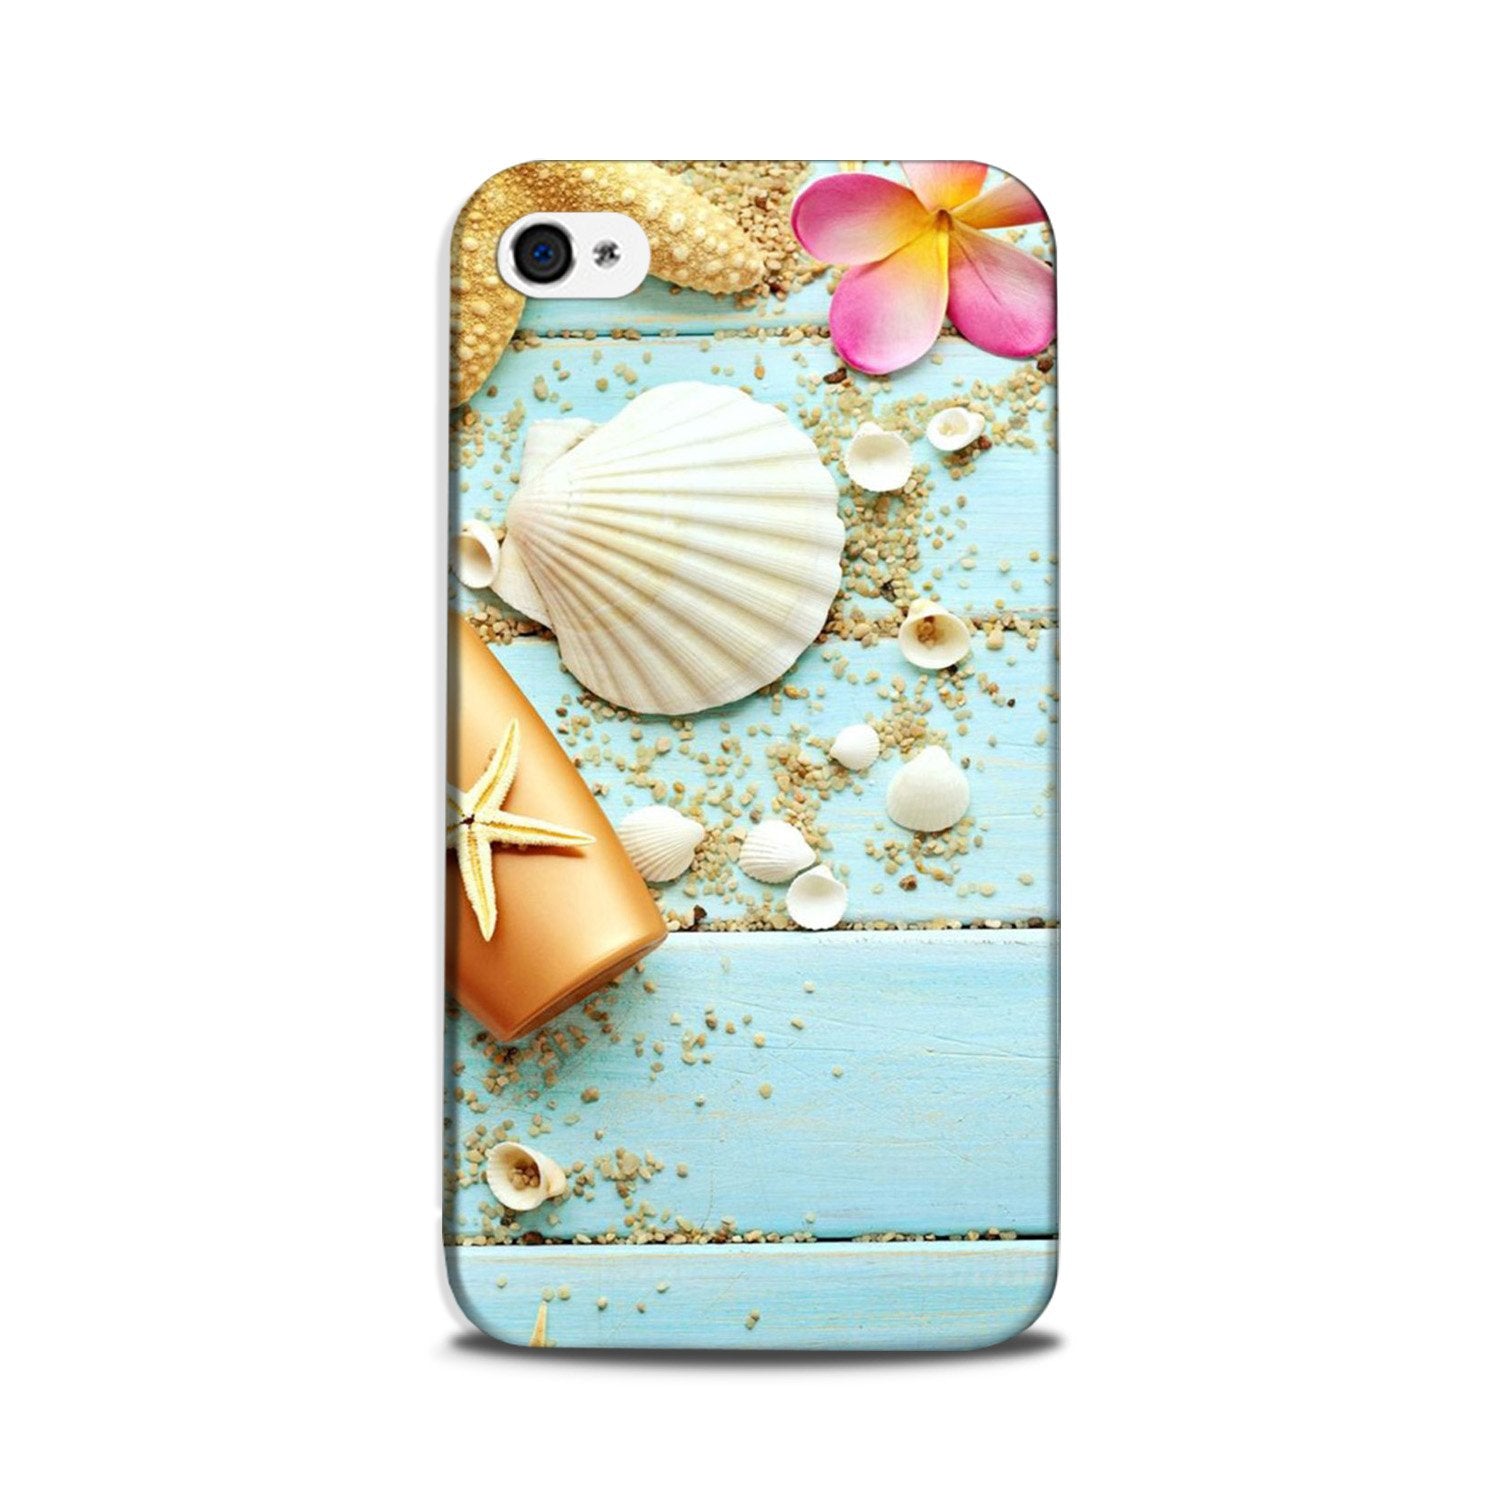 Sea Shells Case for iPhone 5/ 5s